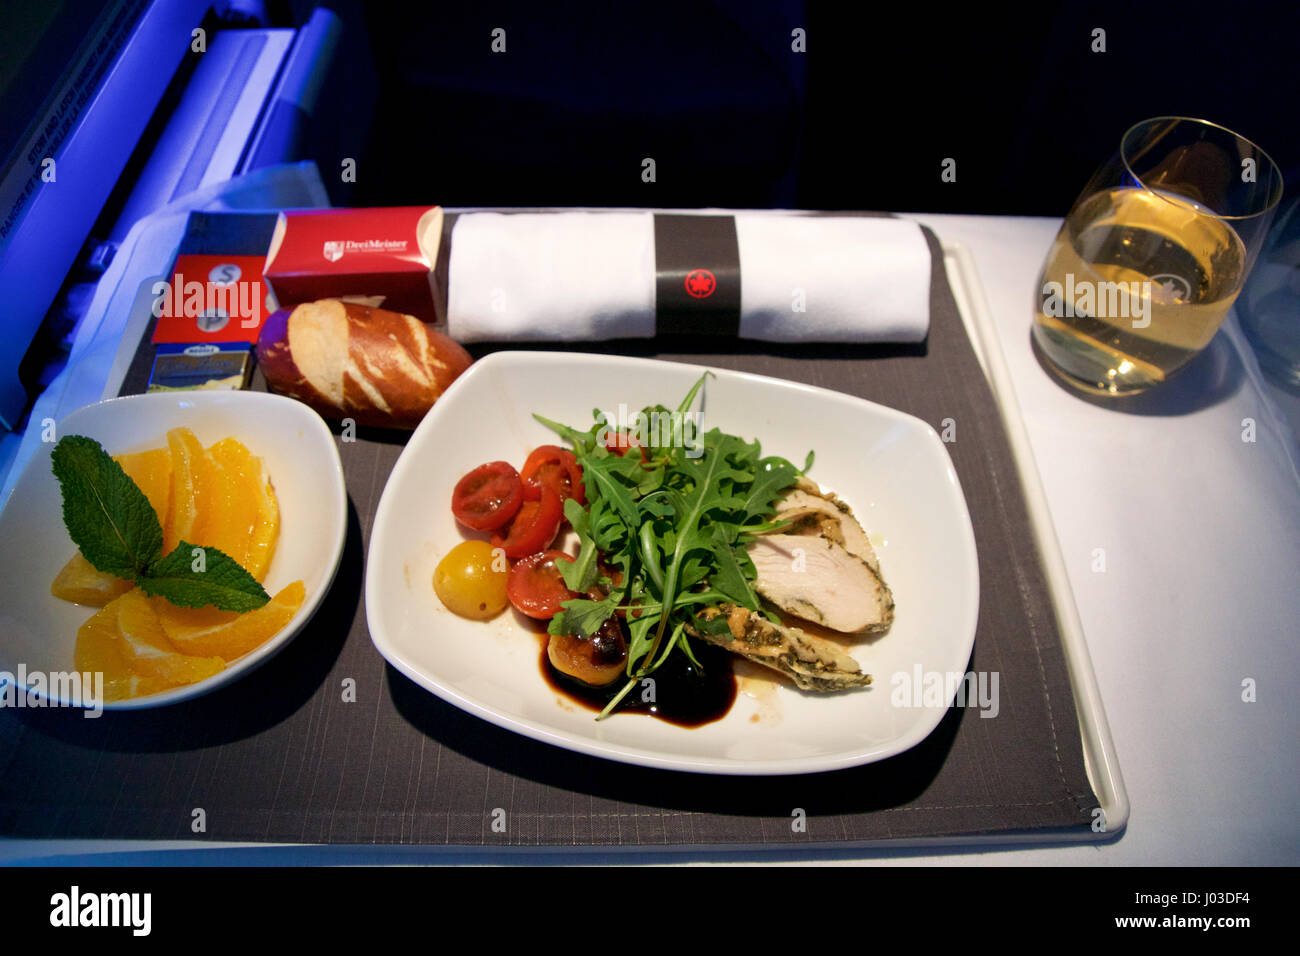 TORONTO, CANADA - JAN 21st, 2017: Air Canada Business Class in-flight meal, chicken with cherry tomato salad as an pre-arrival snack Stock Photo